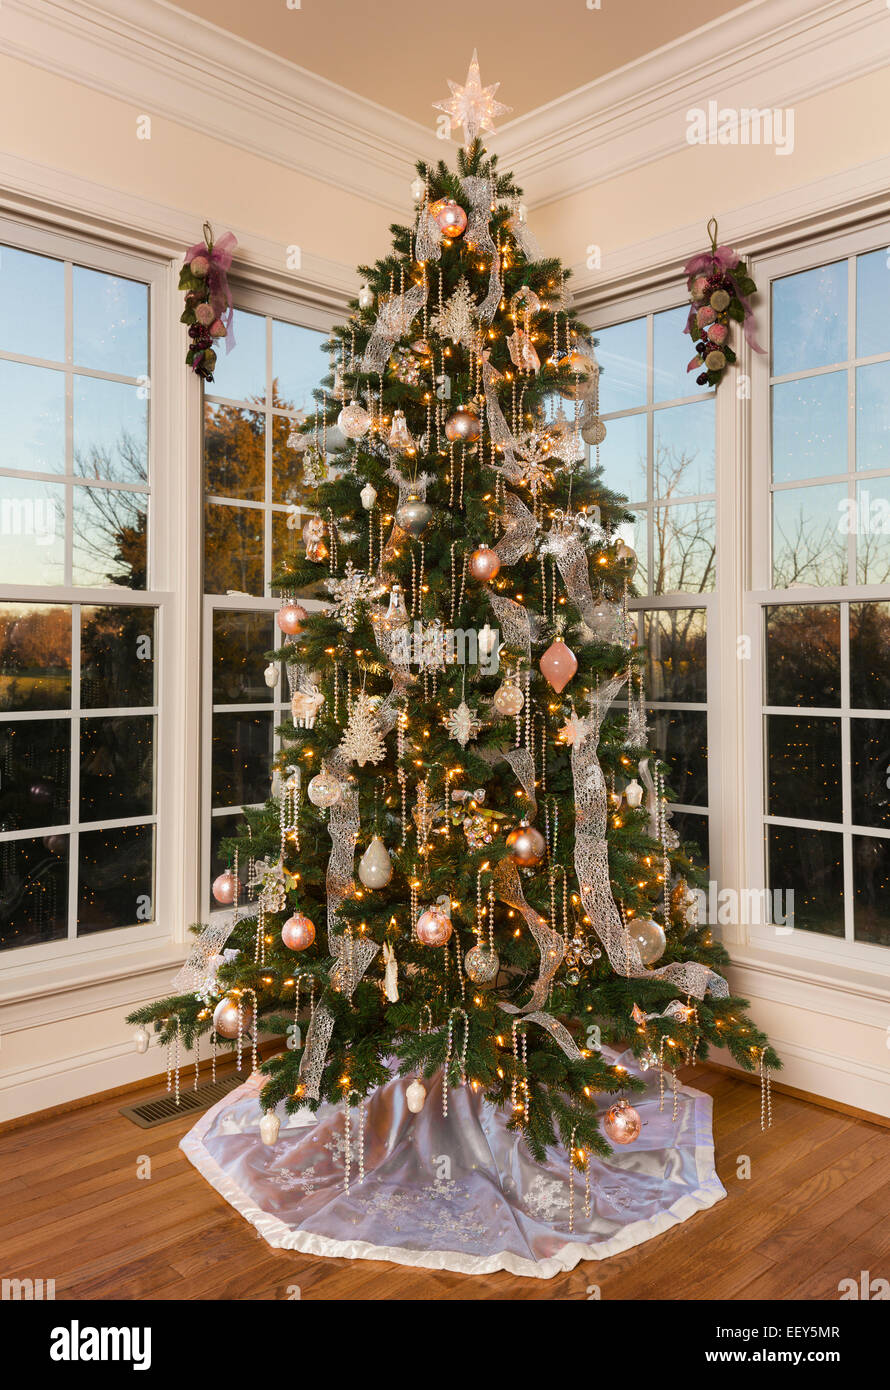 Christmas tree in the corner of a modern family home Stock Photo